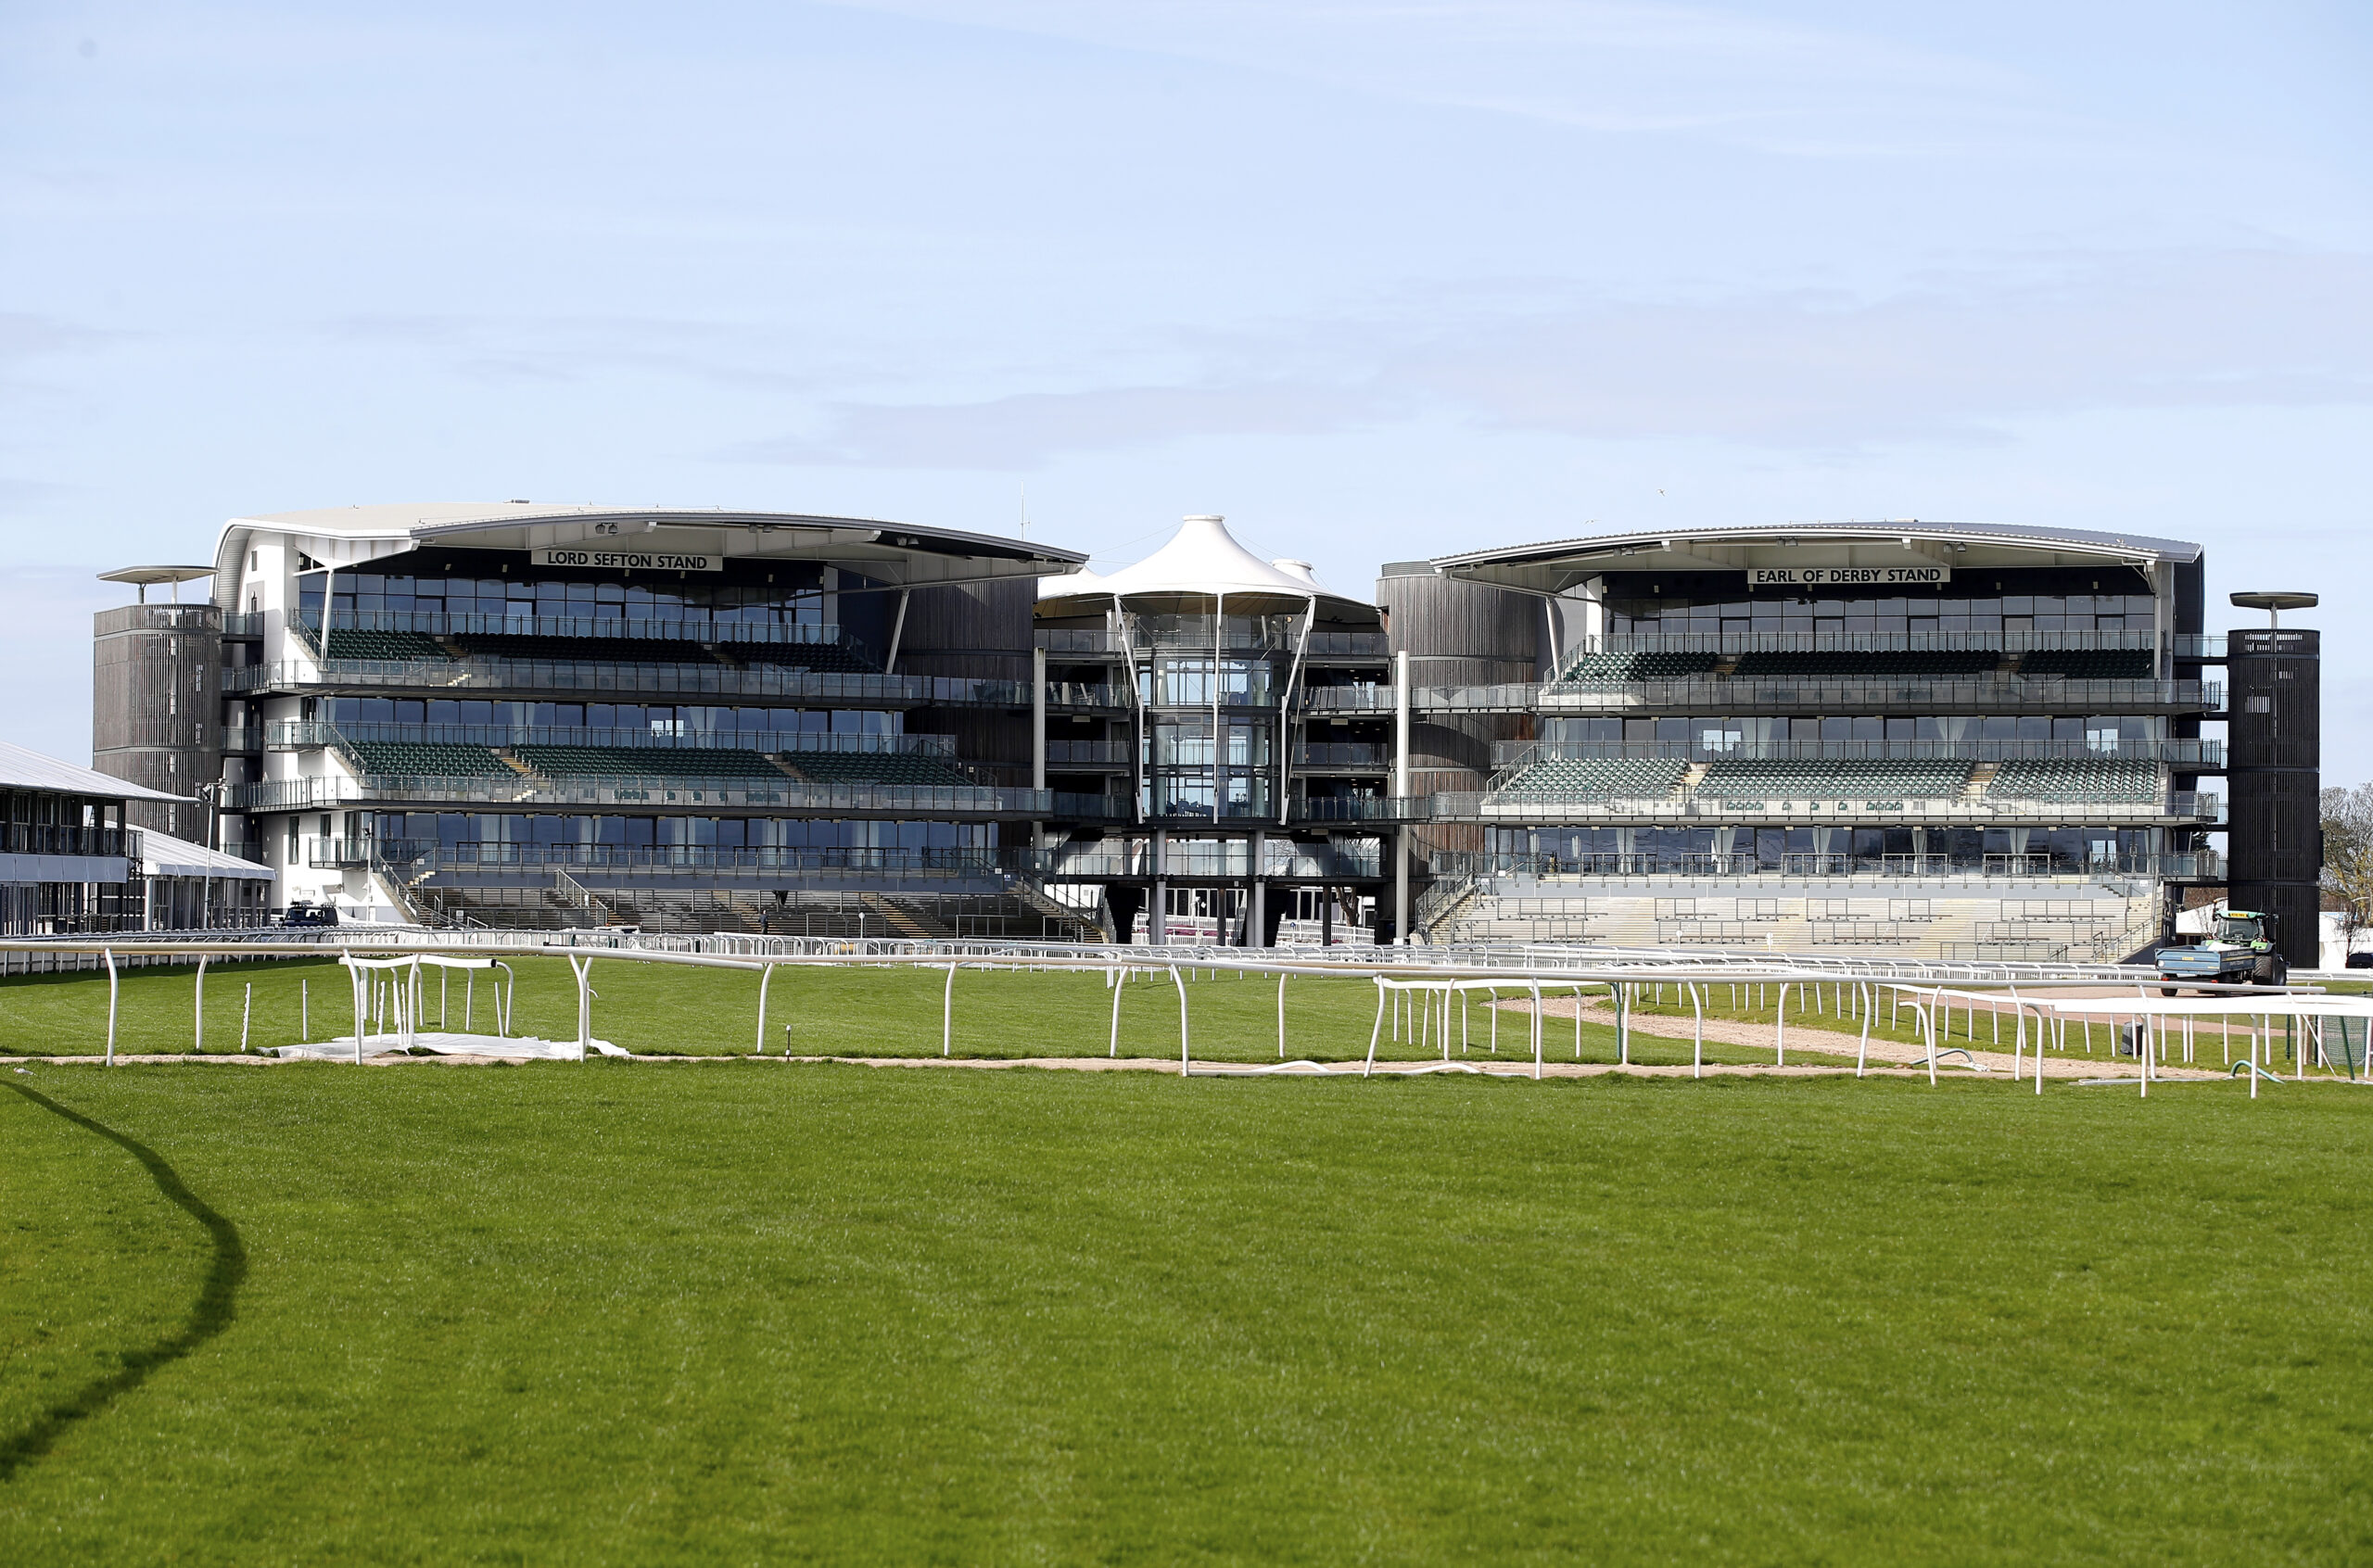 GRAND NATIONAL: Solving The Aintree Puzzle